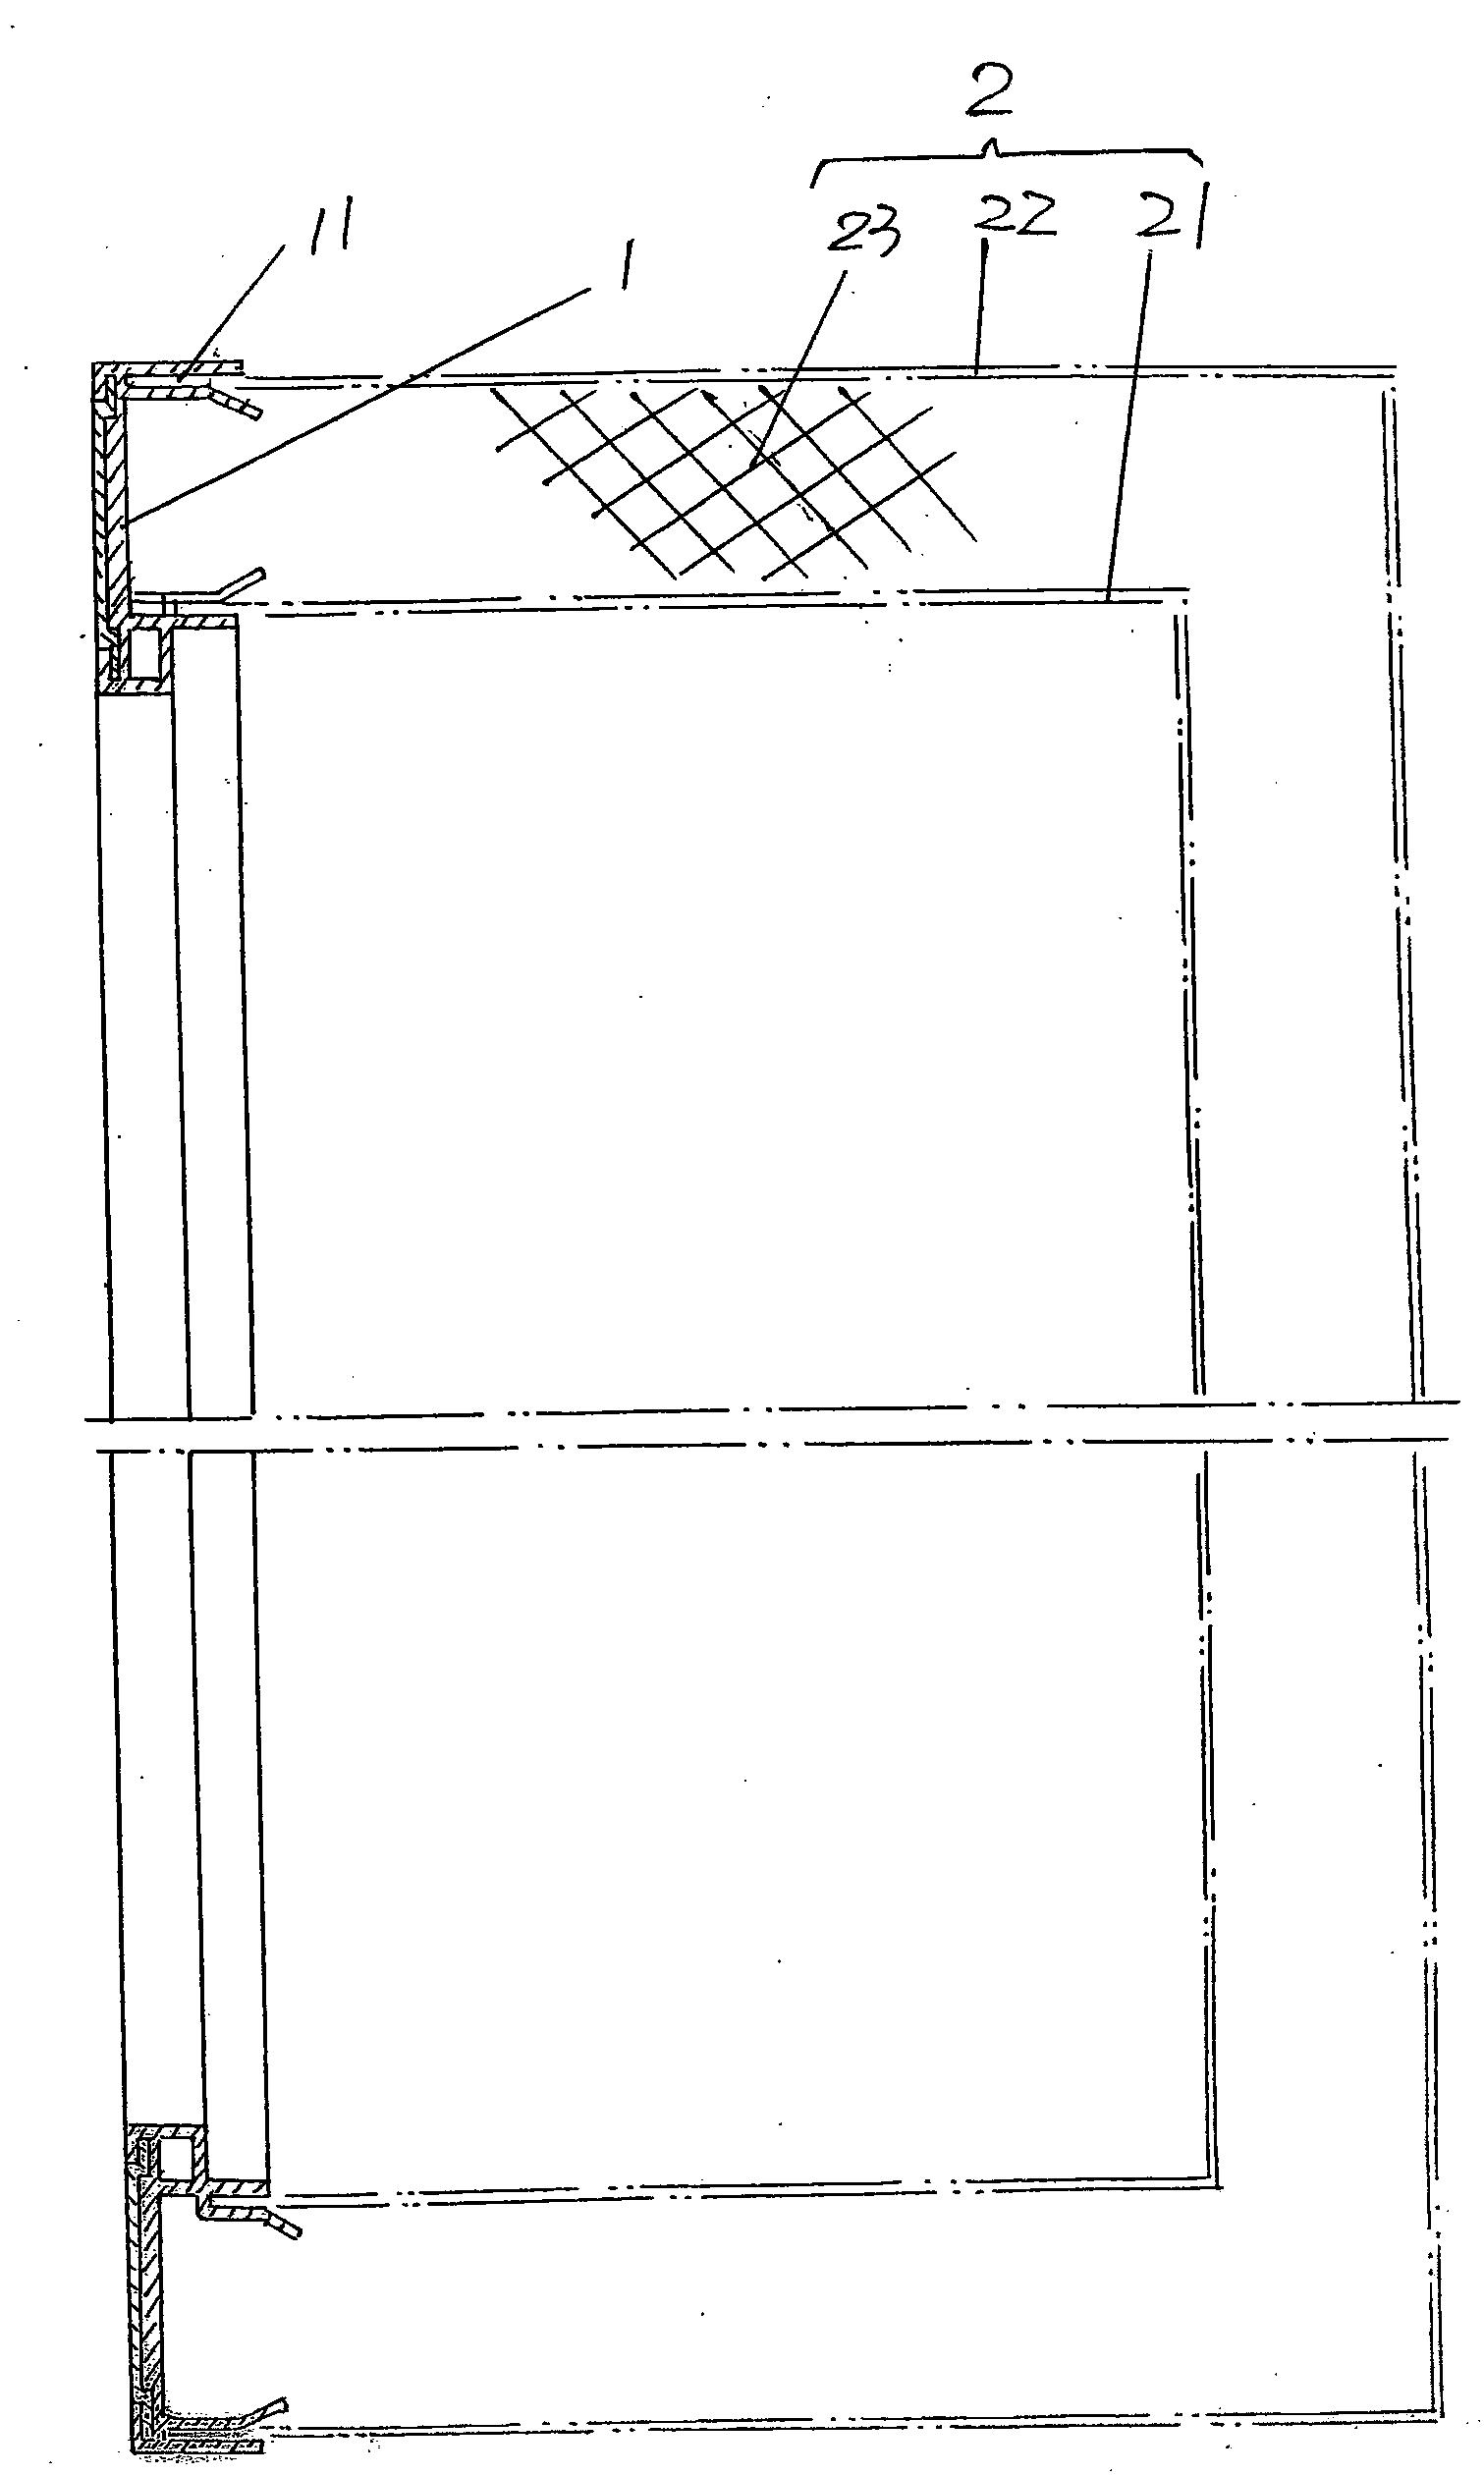 Opening frame and box matching structure of food refrigeration display cabinet